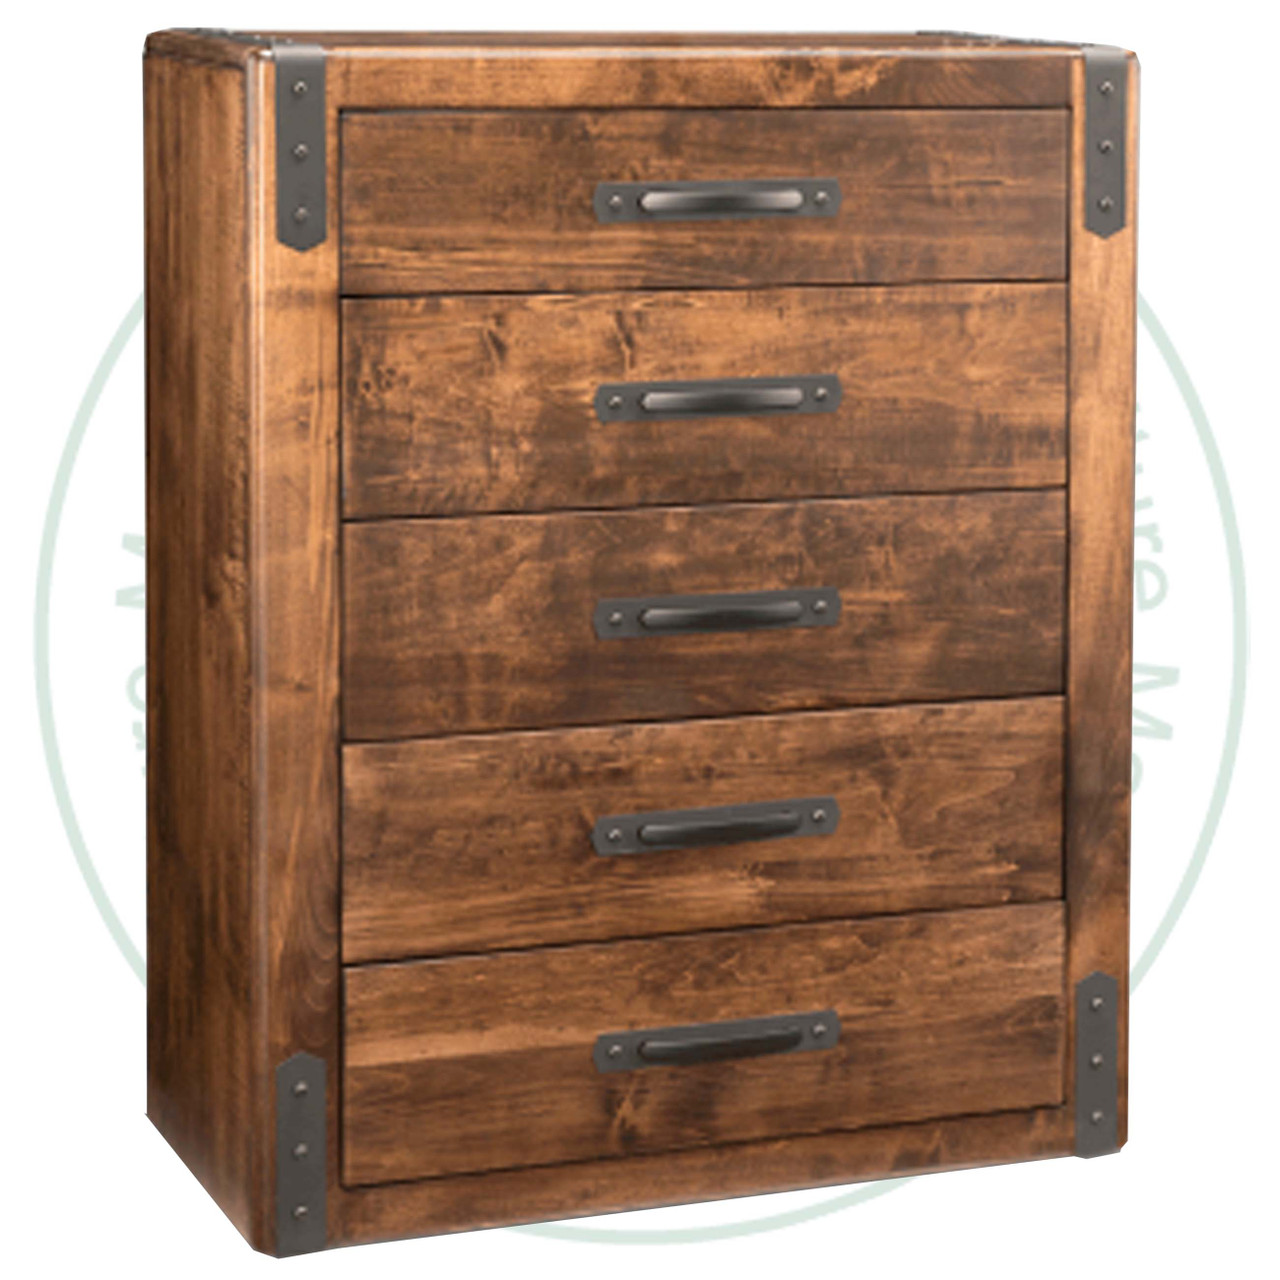 Wormy Maple Union Station Chest Of Drawers 18.5'' Deep x 39'' Wide x 48.5'' High